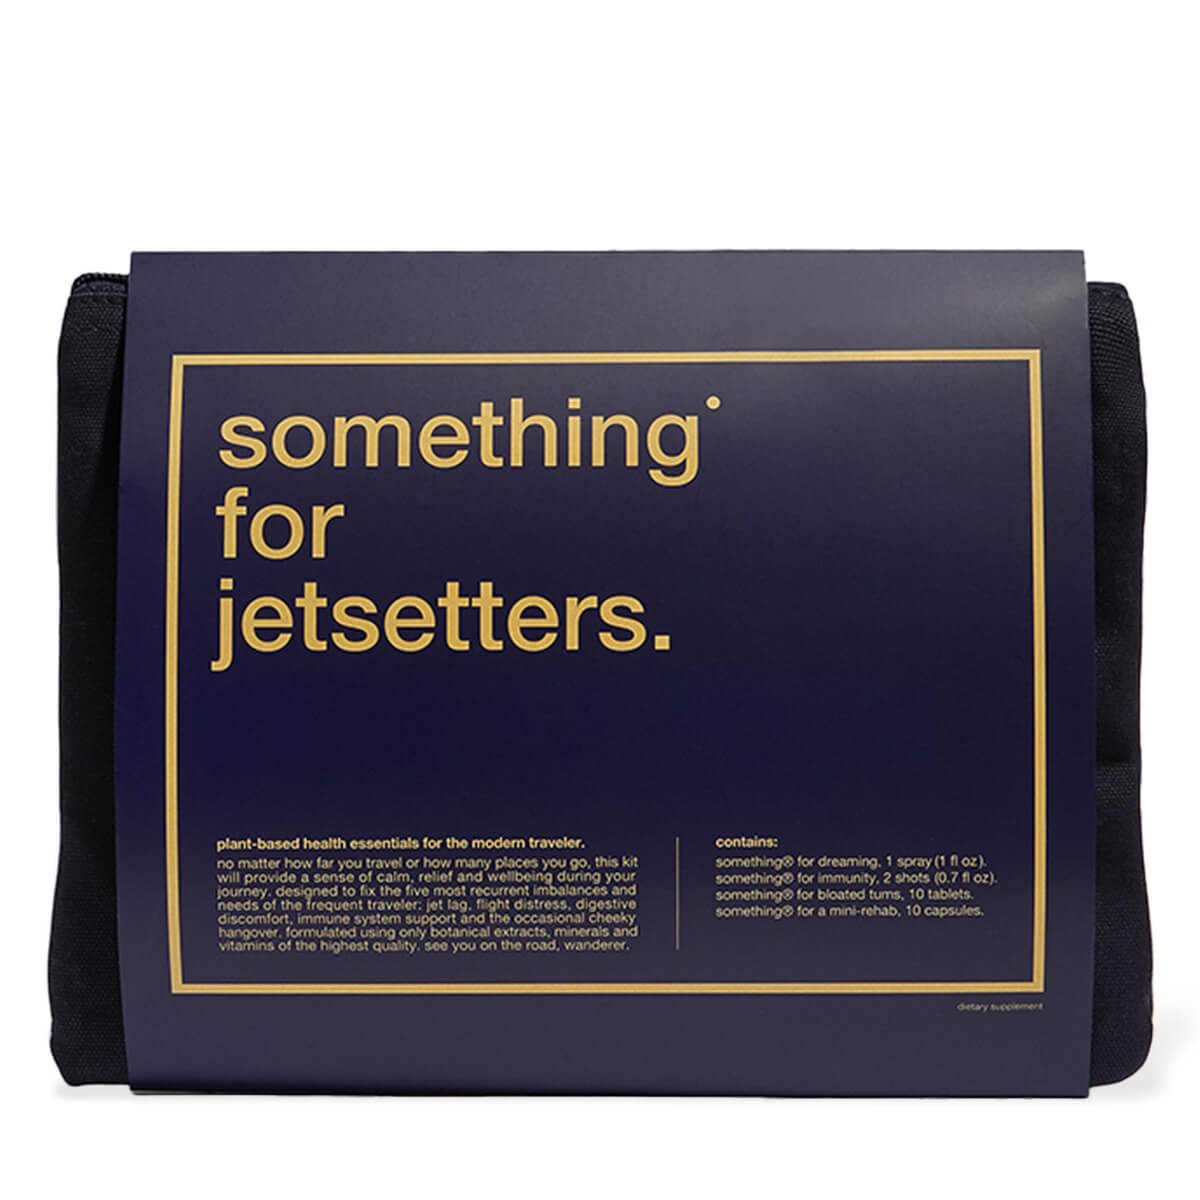 SOMETHING FOR THE JETSETTERS by the Biocol Labs